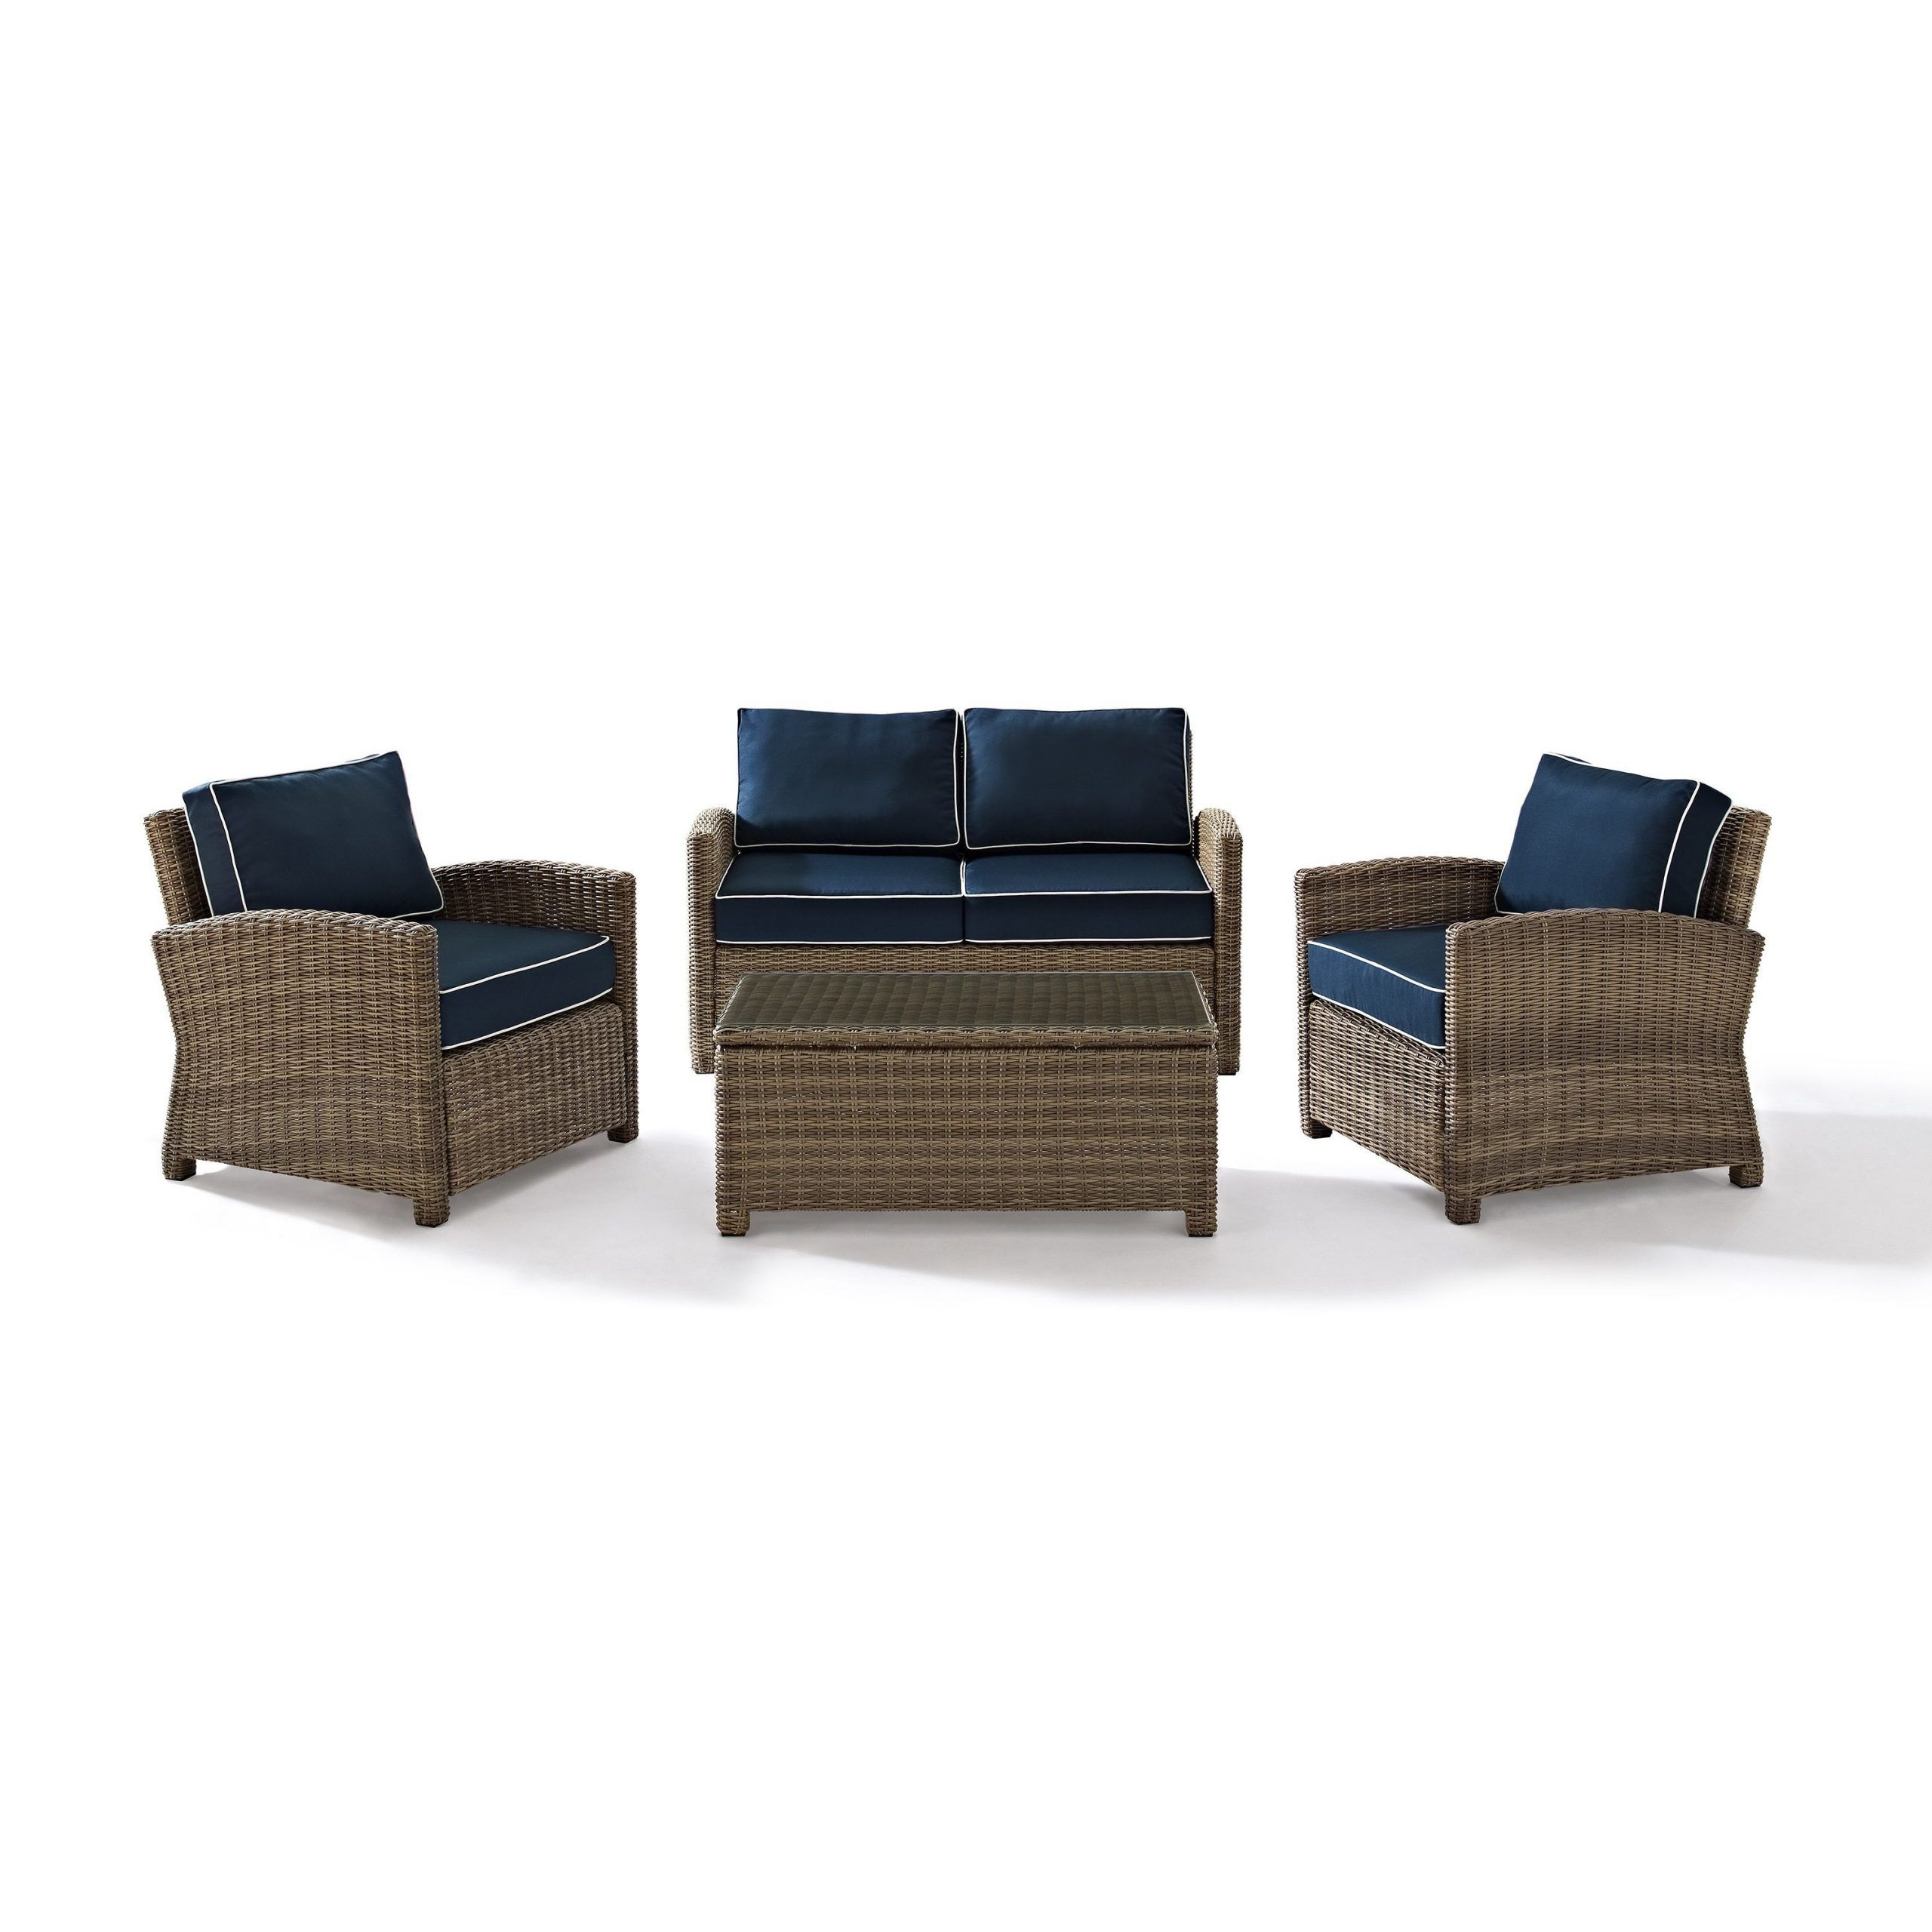 Bradenton Outdoor Wicker 4 Piece Seating Set With Navy Cushions (Brown Regarding Navy Outdoor Seating Sectional Patio Sets (View 12 of 15)